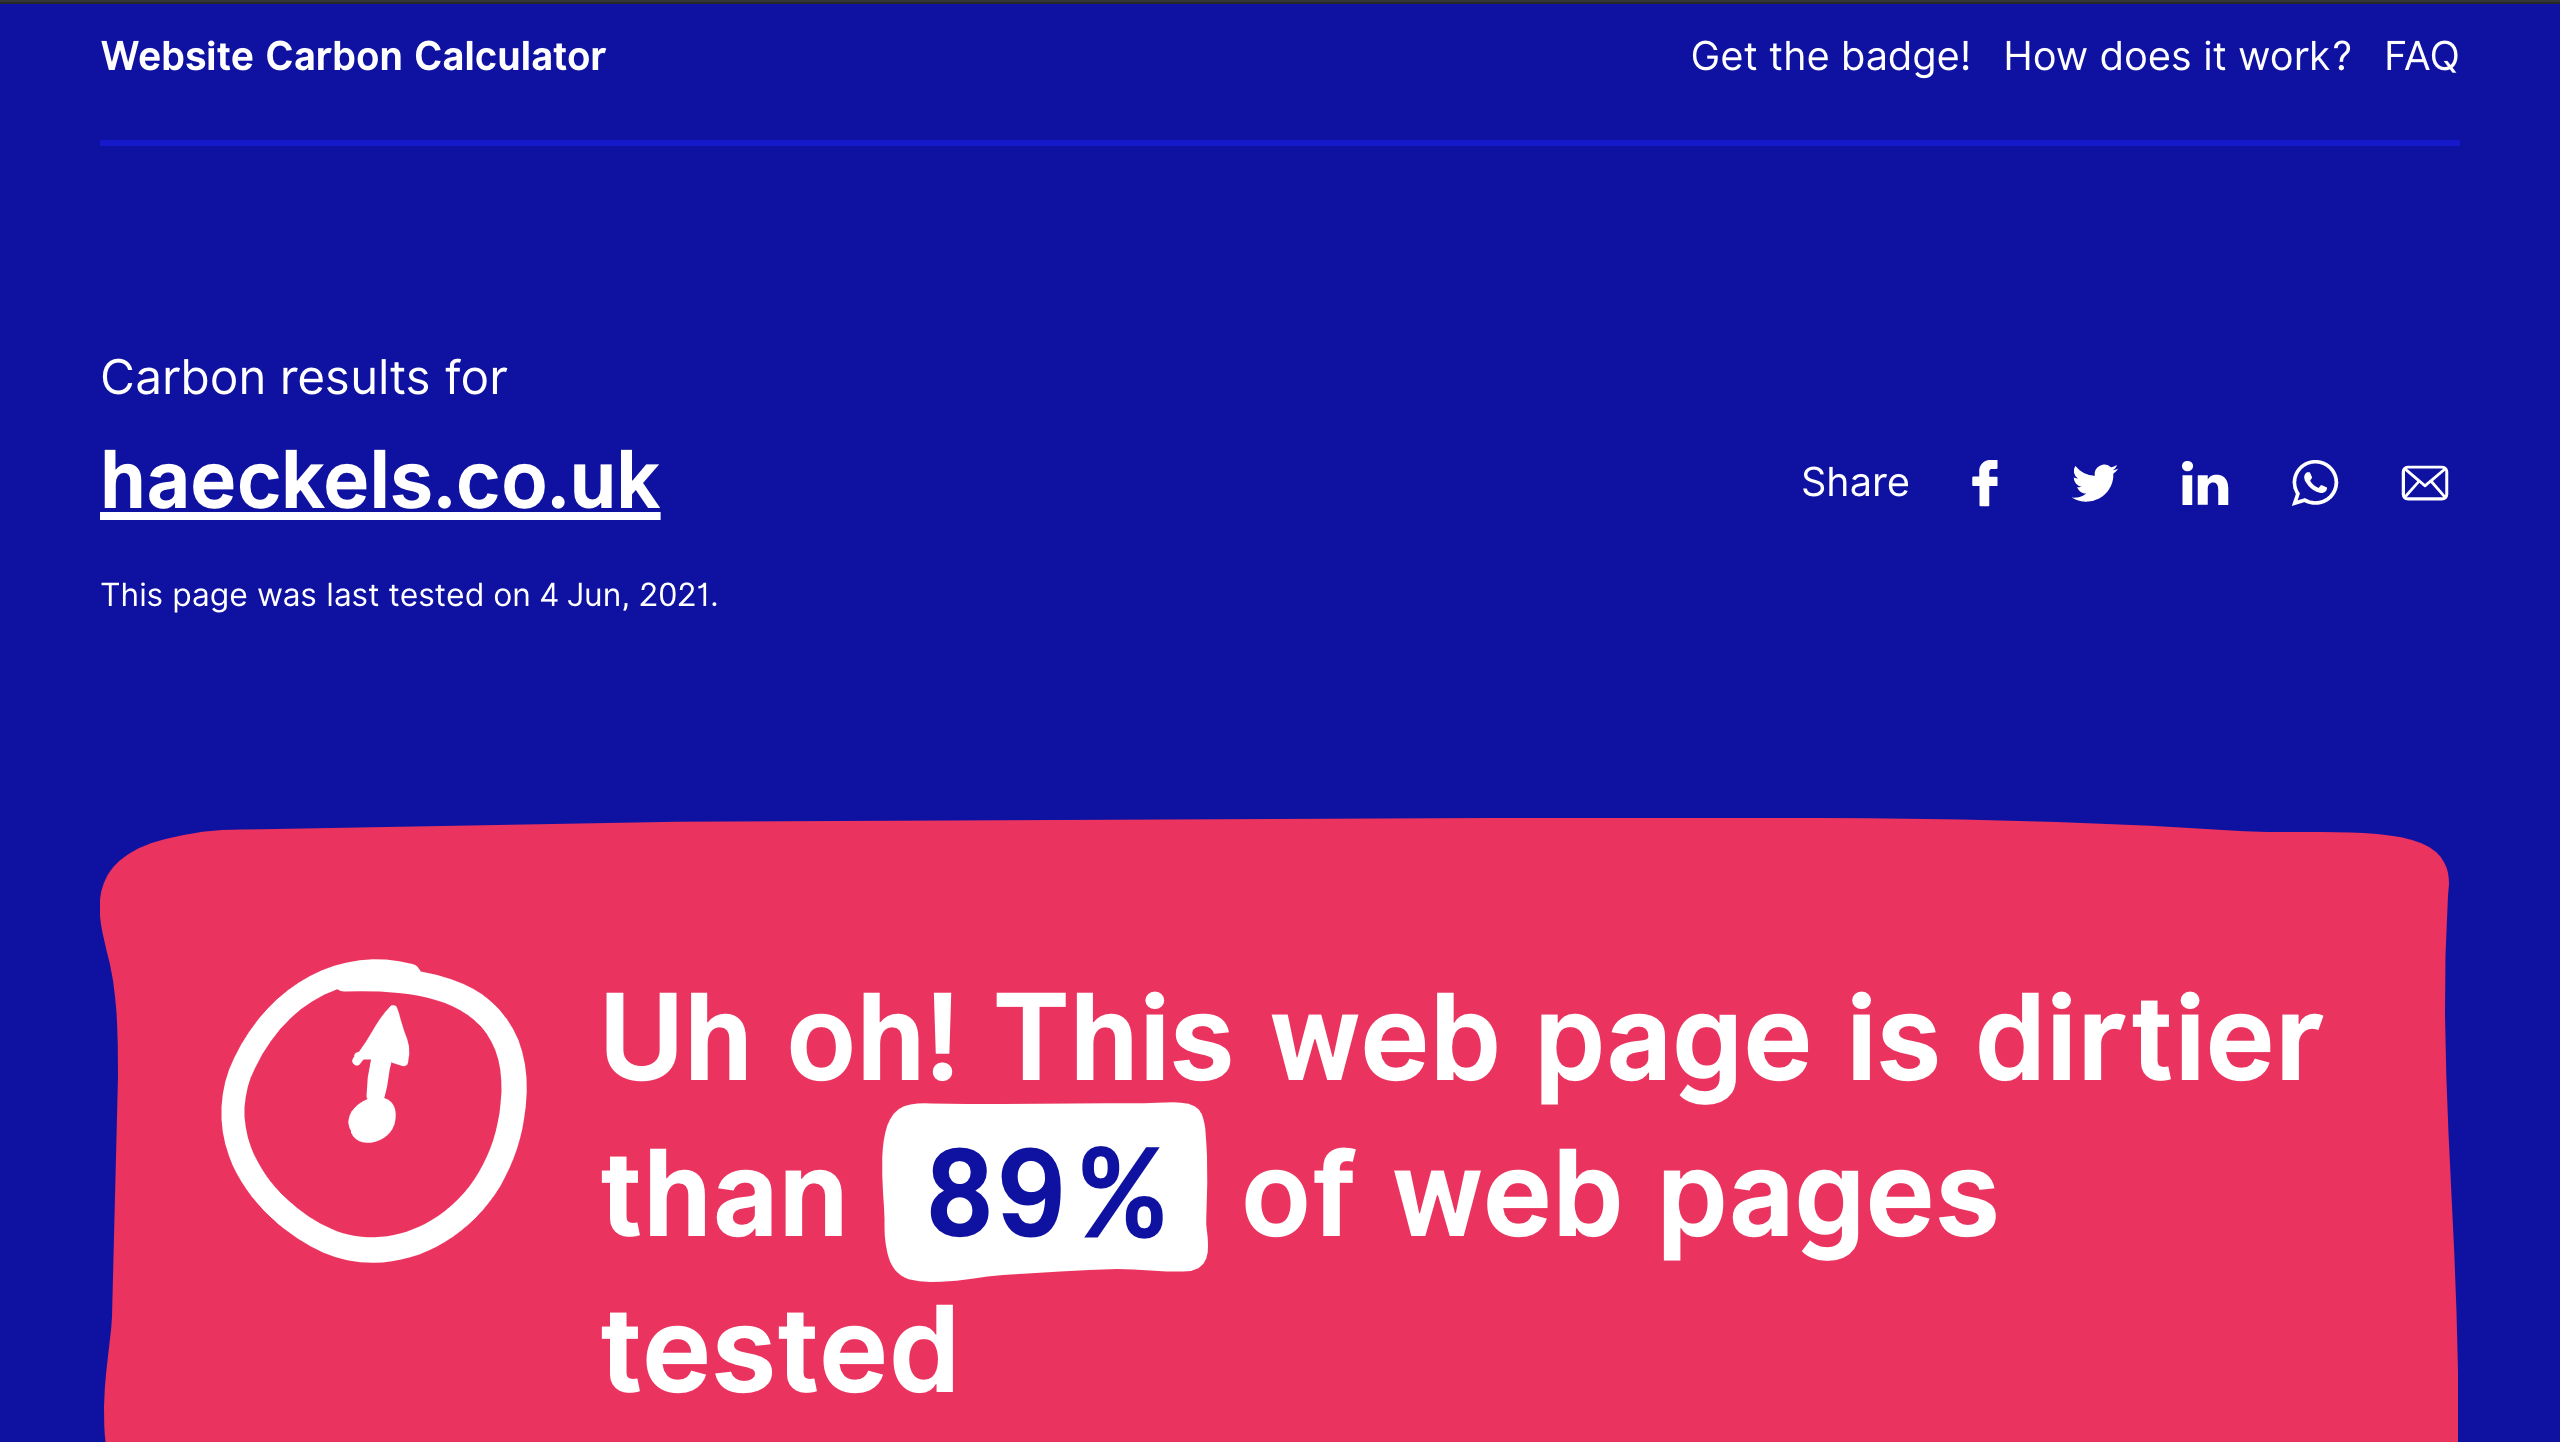 Haeckel's web page dirtier than 89% of web pages tested.